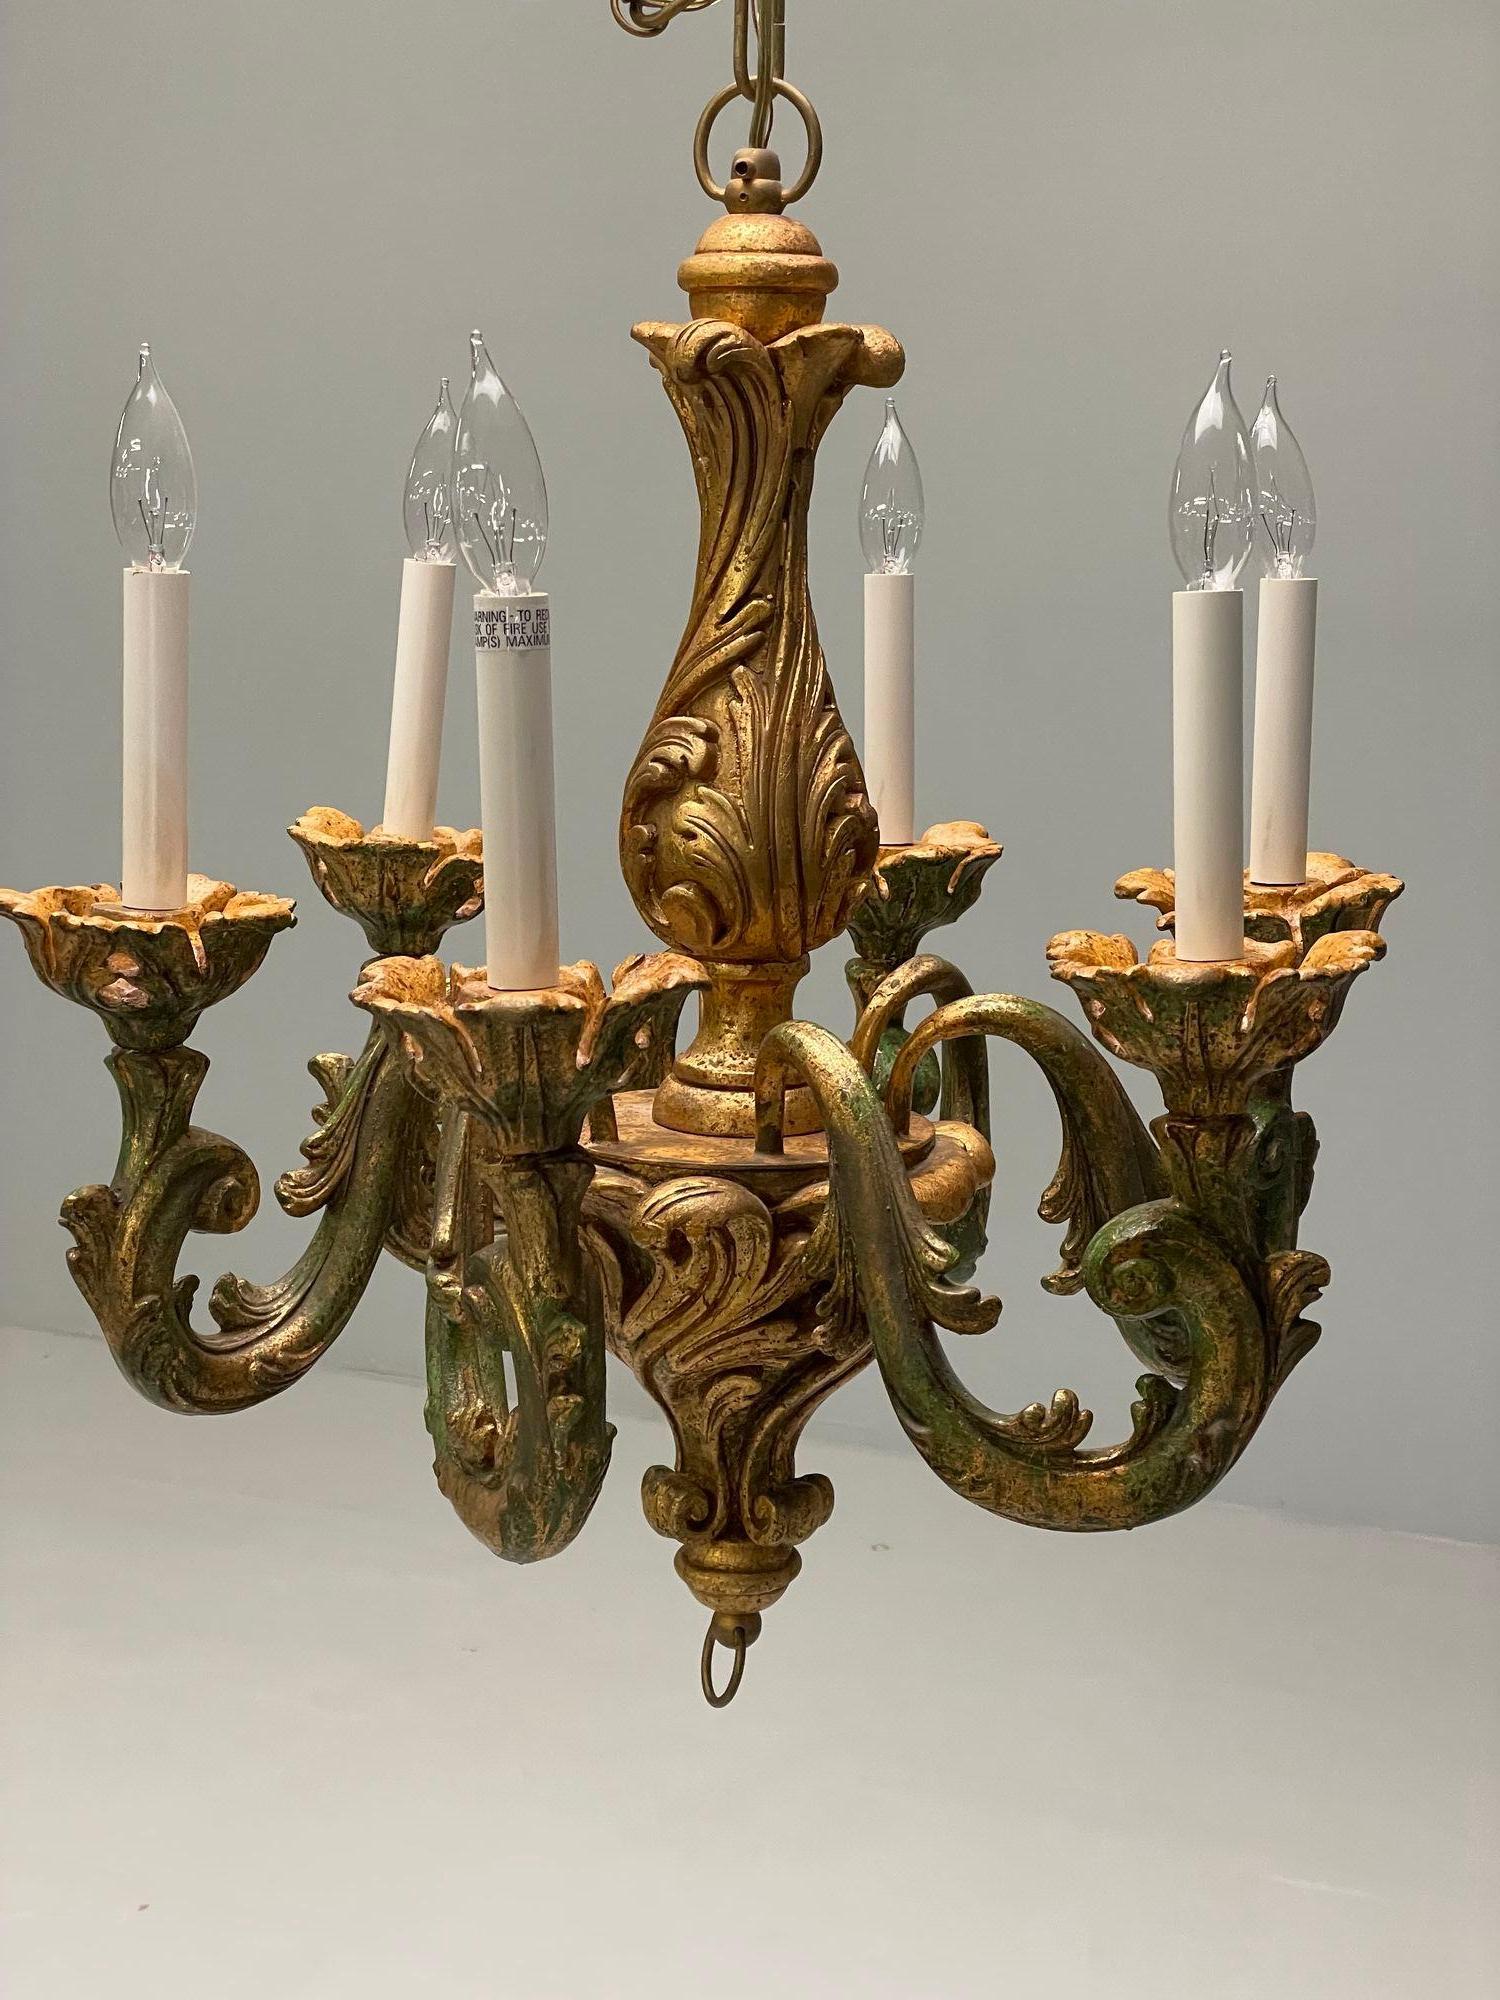 Rococo, Baroque, Italian Six Light Chandelier, Parcel Paint, Gilt, Italy, 1970s

A fine Rococo framed chandelier made in Italy having six lights on a finely carved frame having green and gilt decorated design. The whole having a matching chain and